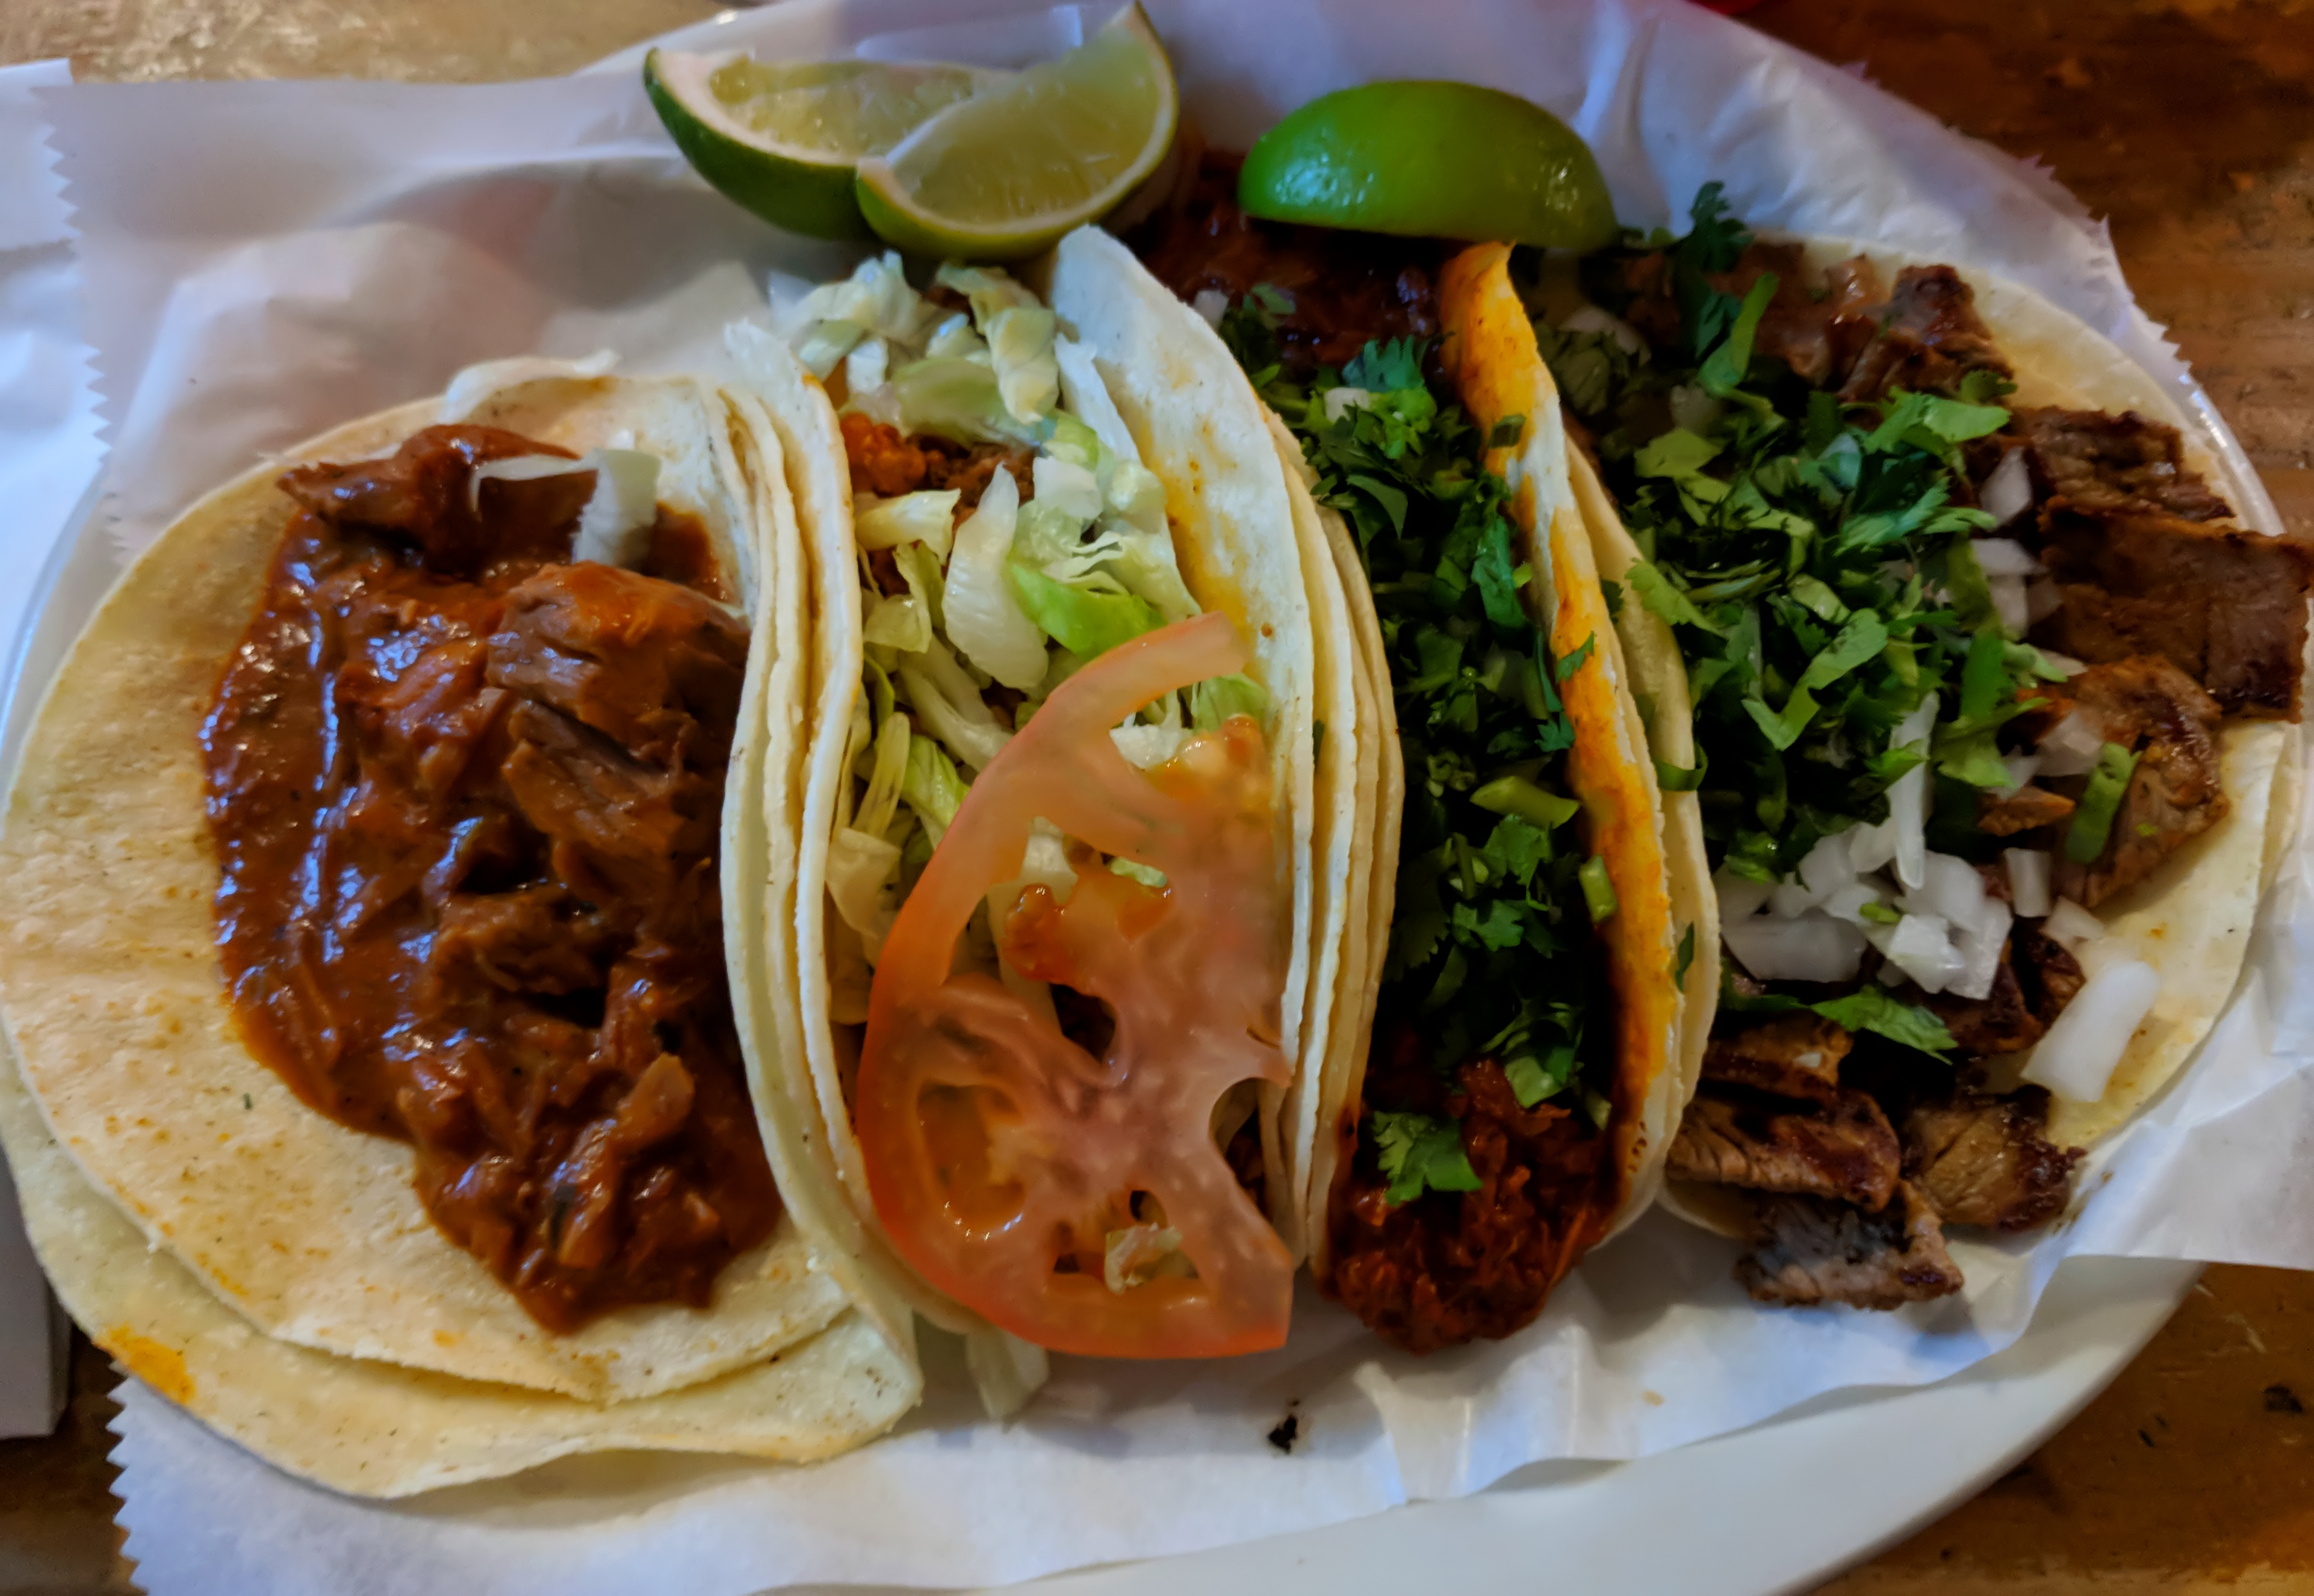 Four tasty tacos with a variety of vegetables and meats